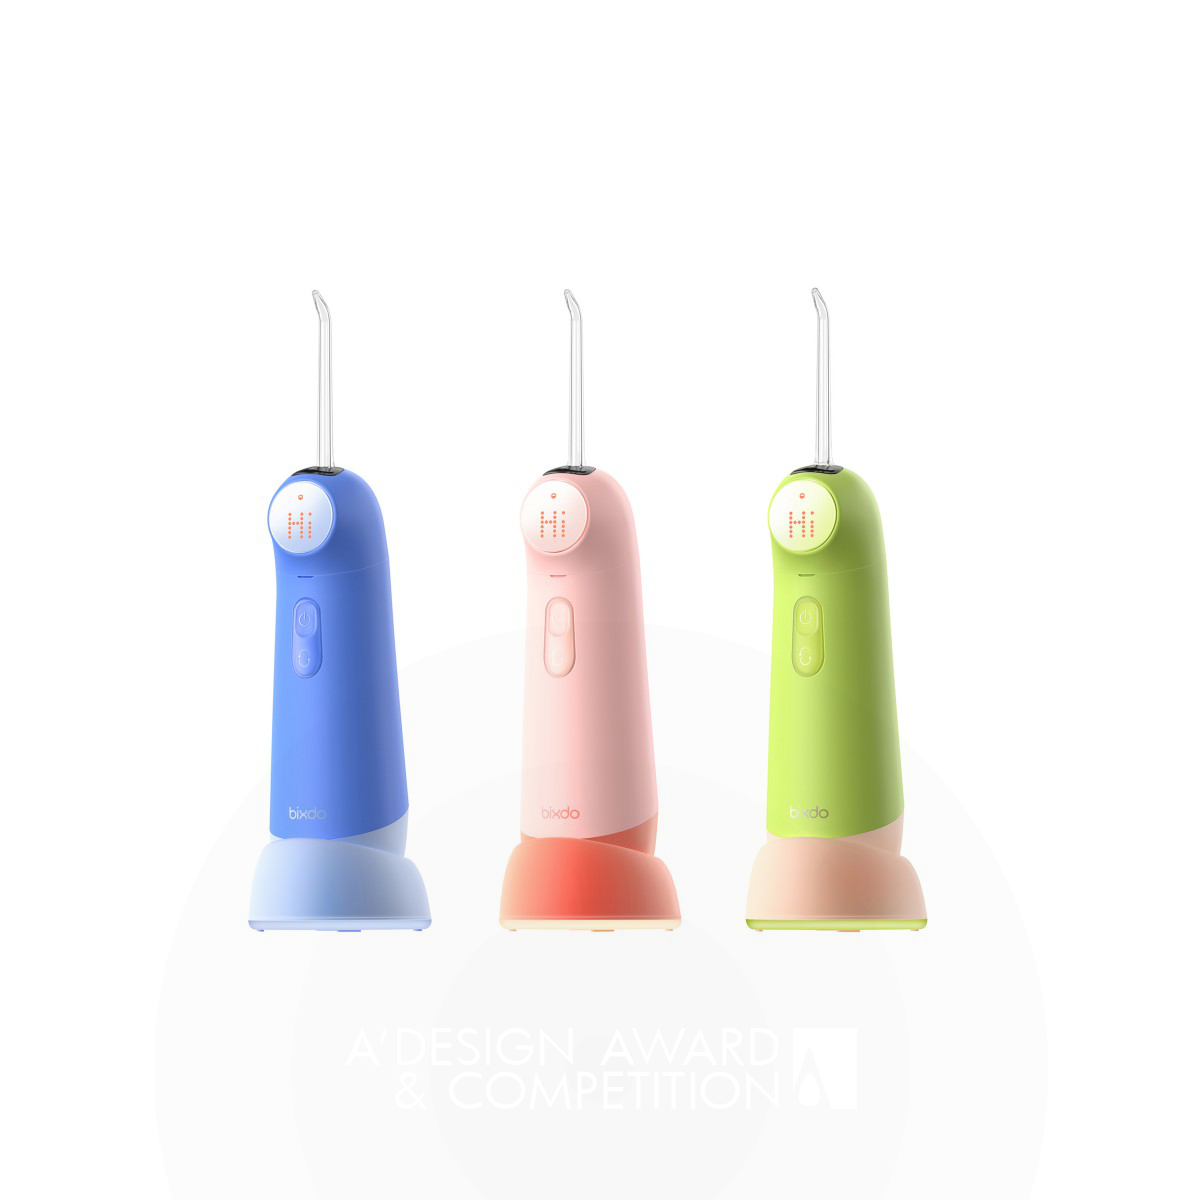 Bixdo (SH) Healthcare Technology Co.,Ltd wins Iron at the prestigious A' Beauty, Personal Care and Cosmetic Products Design Award with Bixdo K30 Kids Oral Irrigator.